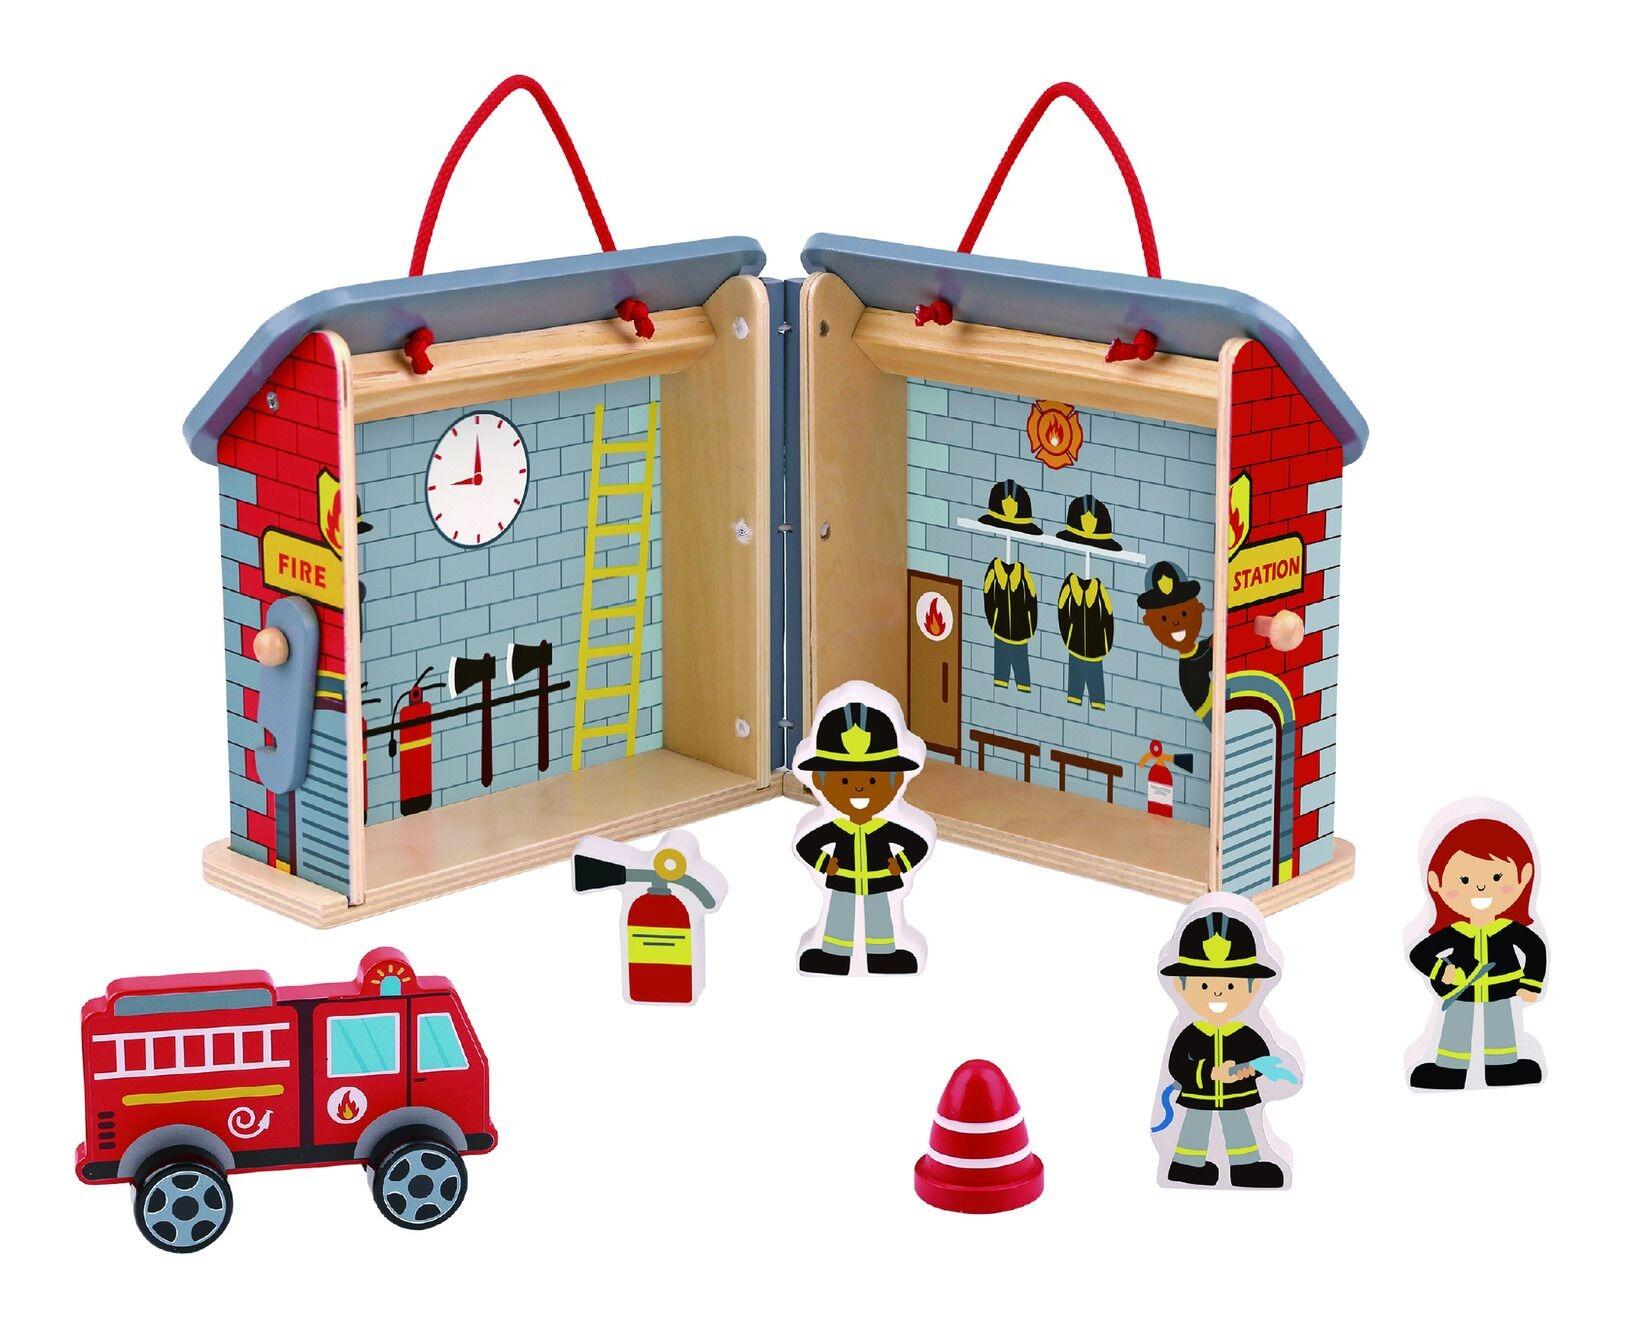 Tooky Toy Wooden Foldable Fire Station